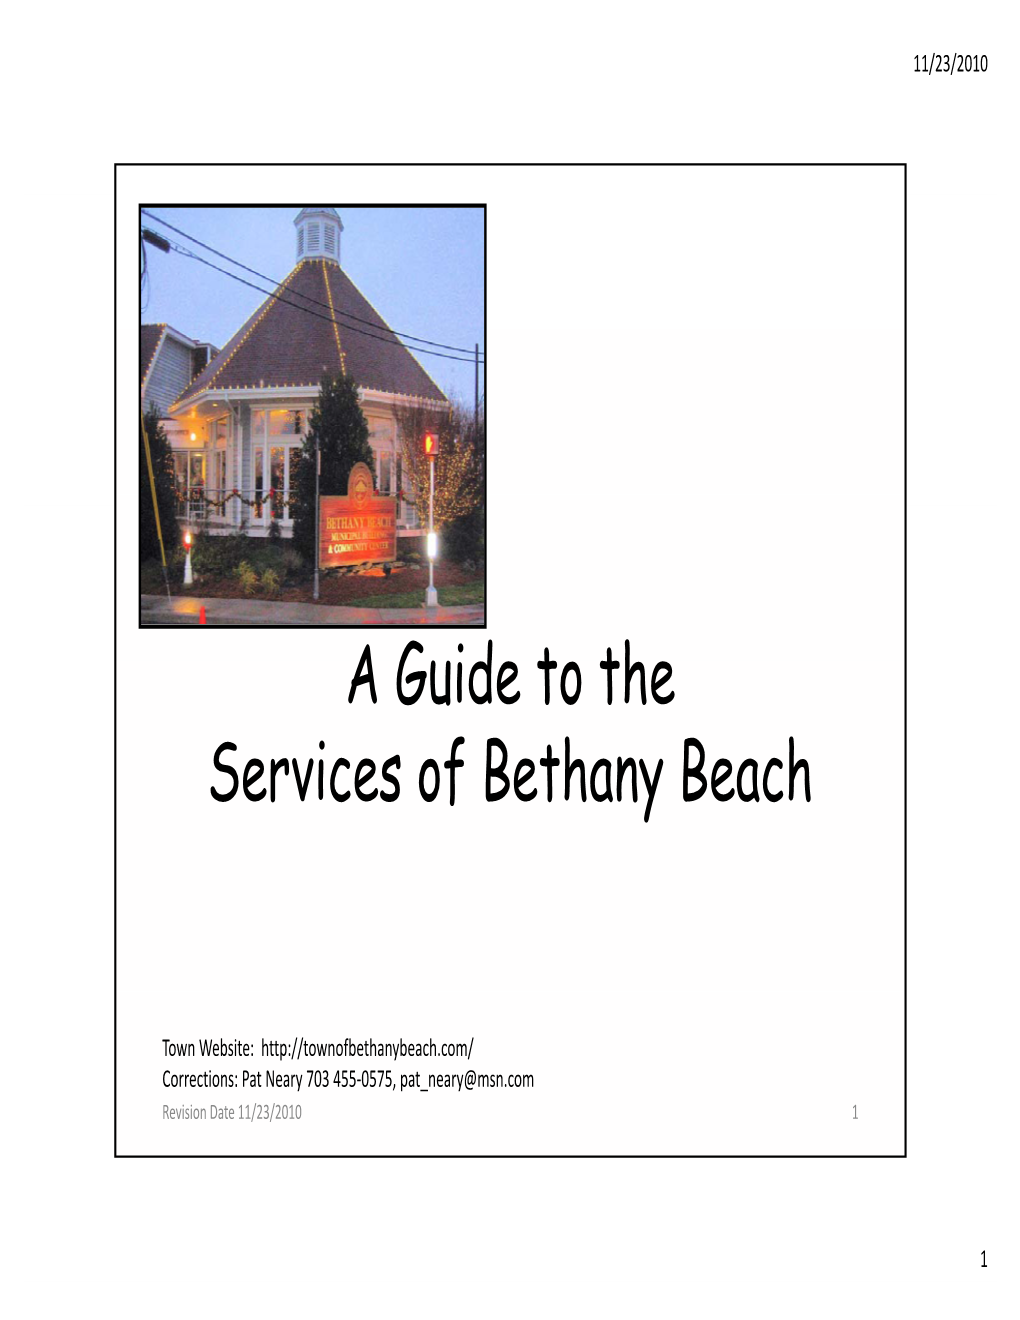 A G Id T Th a Guide to the Services of Bethany Beach